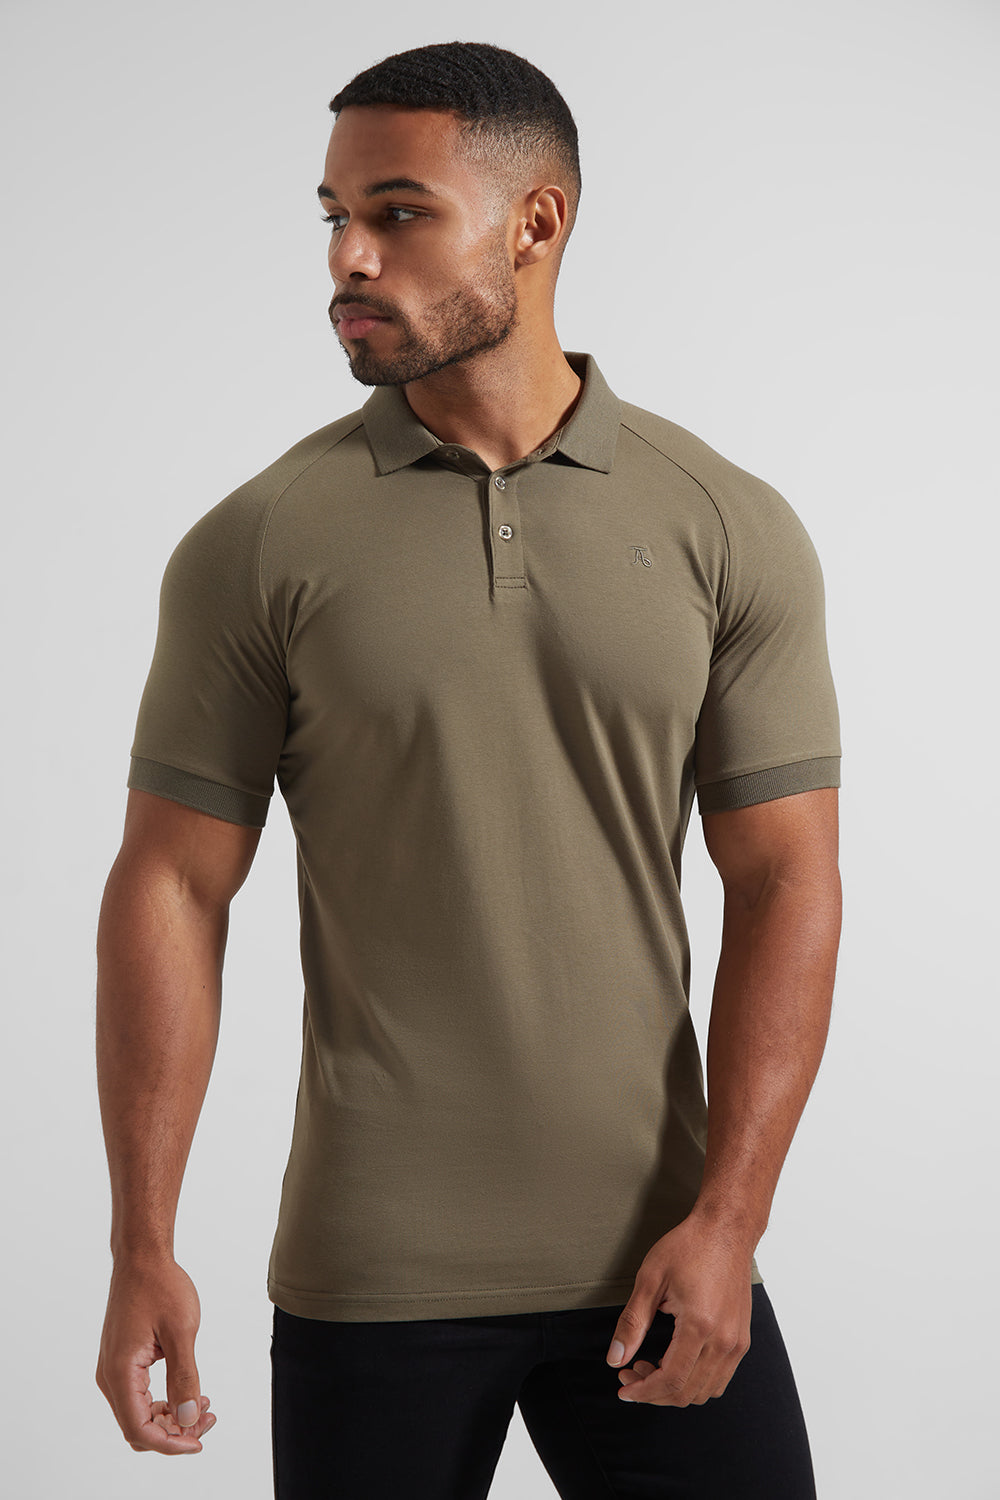 Muscle Fit Polo Shirt in Khaki - TAILORED ATHLETE - ROW